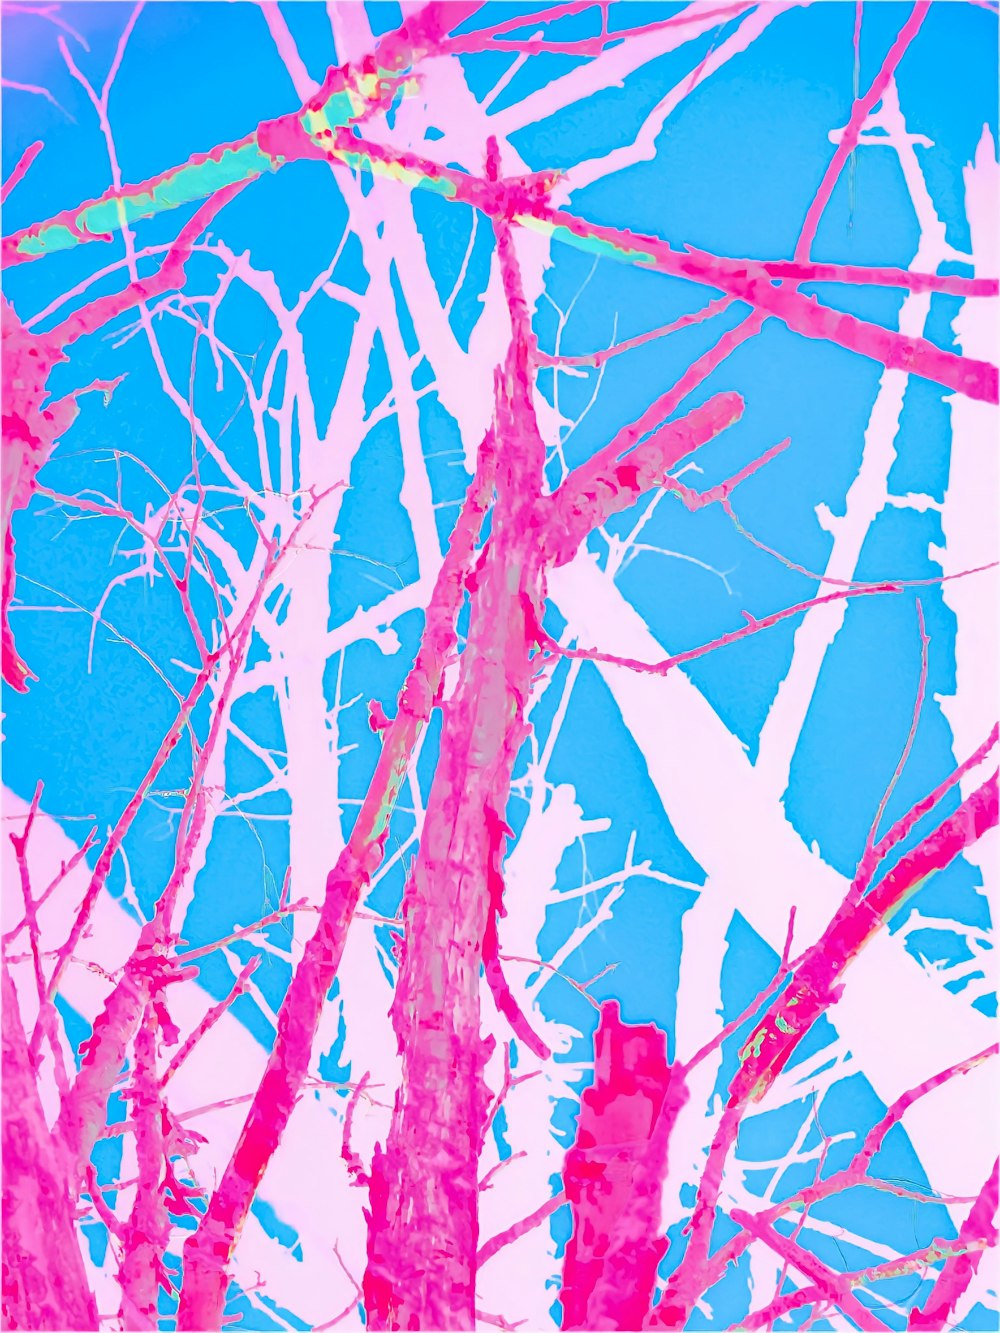 a painting of a tree with pink branches